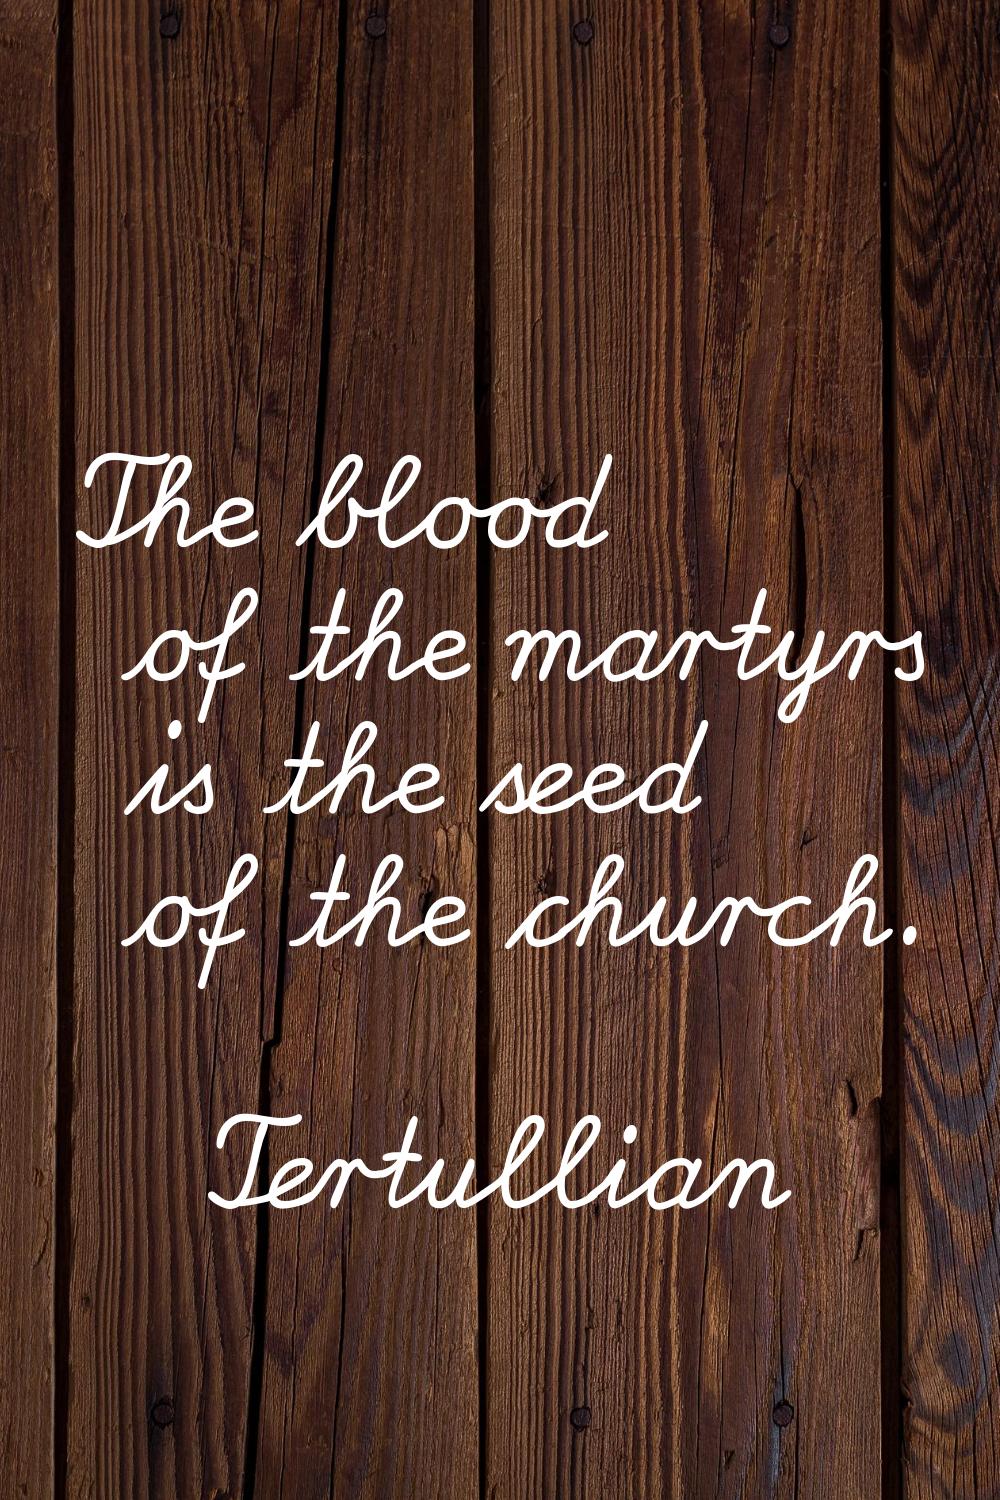 The blood of the martyrs is the seed of the church.